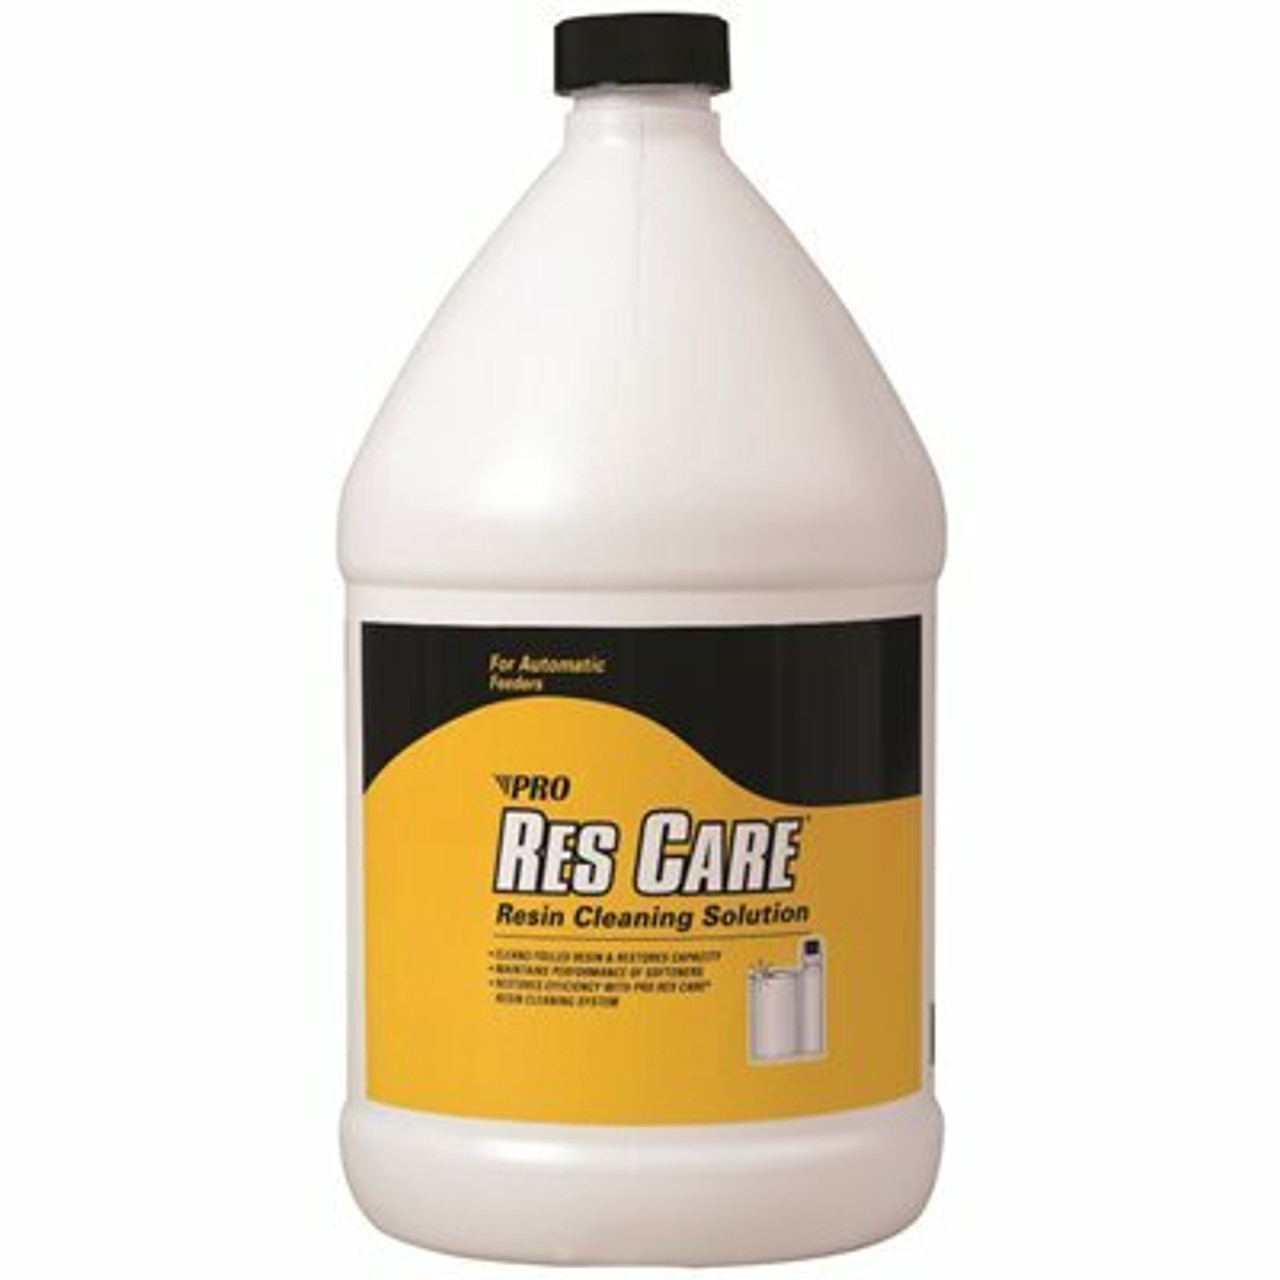 Pro Products Res Care 1 Gal. Liquid Resin Cleaning Solution